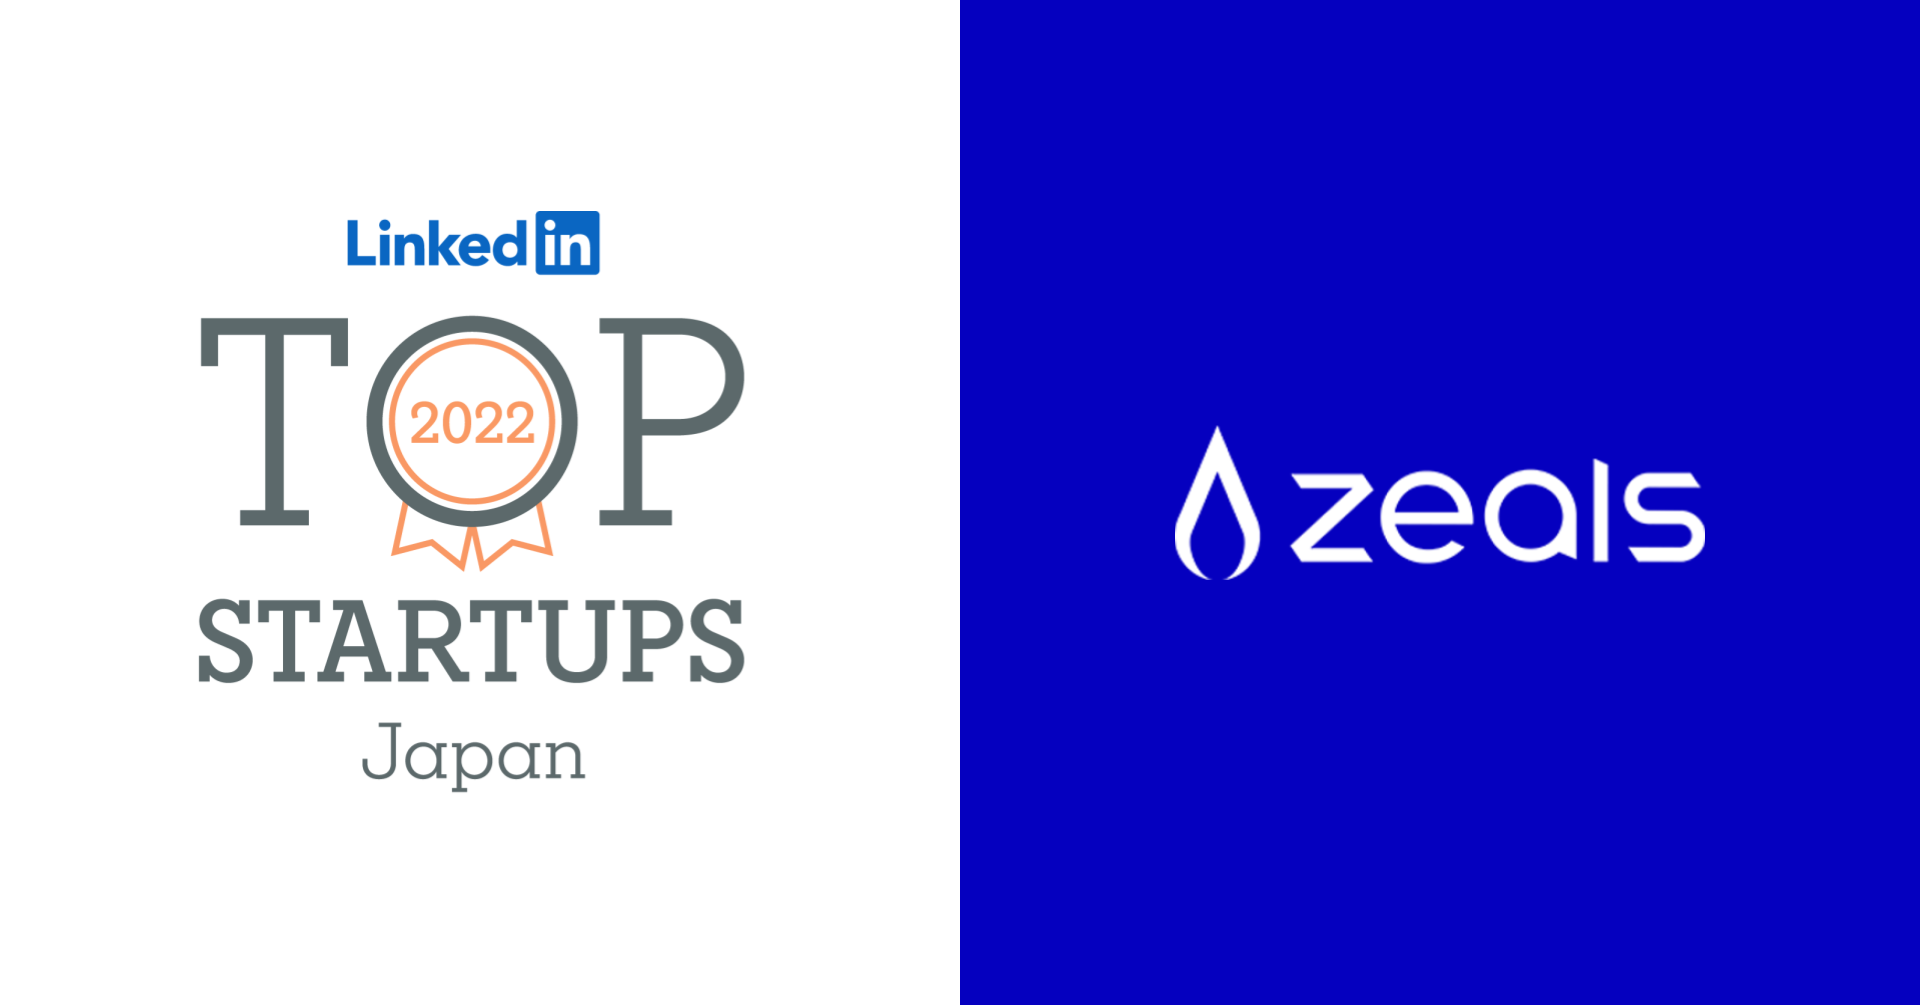 ZEALS was featured in LinkedIn Top Startups 2022 Japan List for the second year in a row!